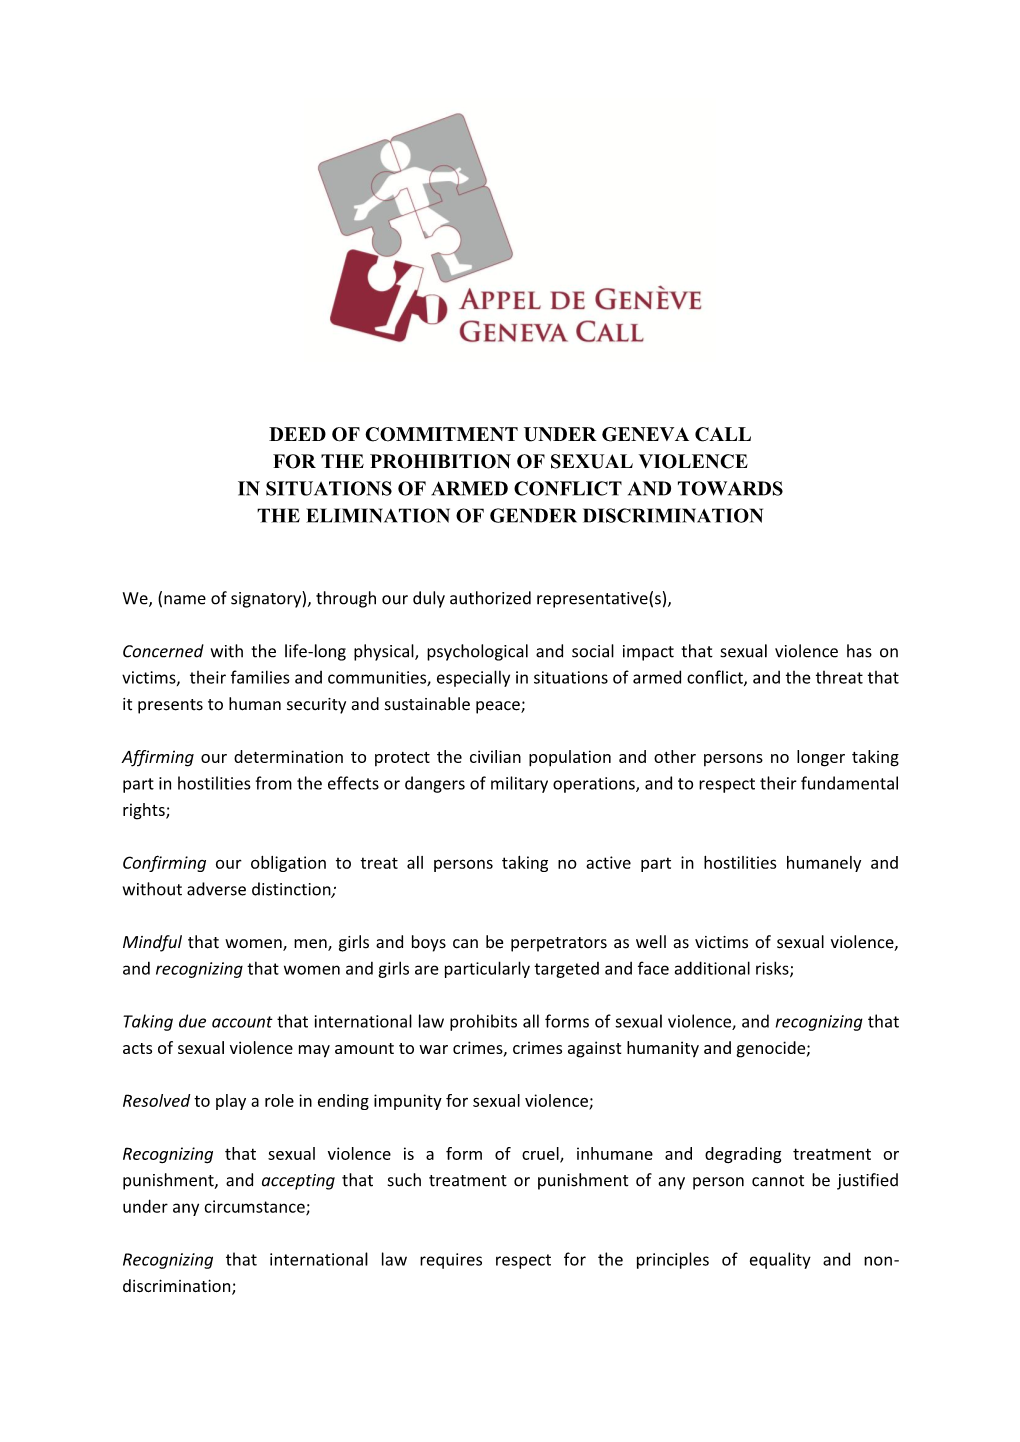 Deed of Commitment Under Geneva Call for the Prohibition of Sexual Violence in Situations of Armed Conflict and Towards the Elimination of Gender Discrimination